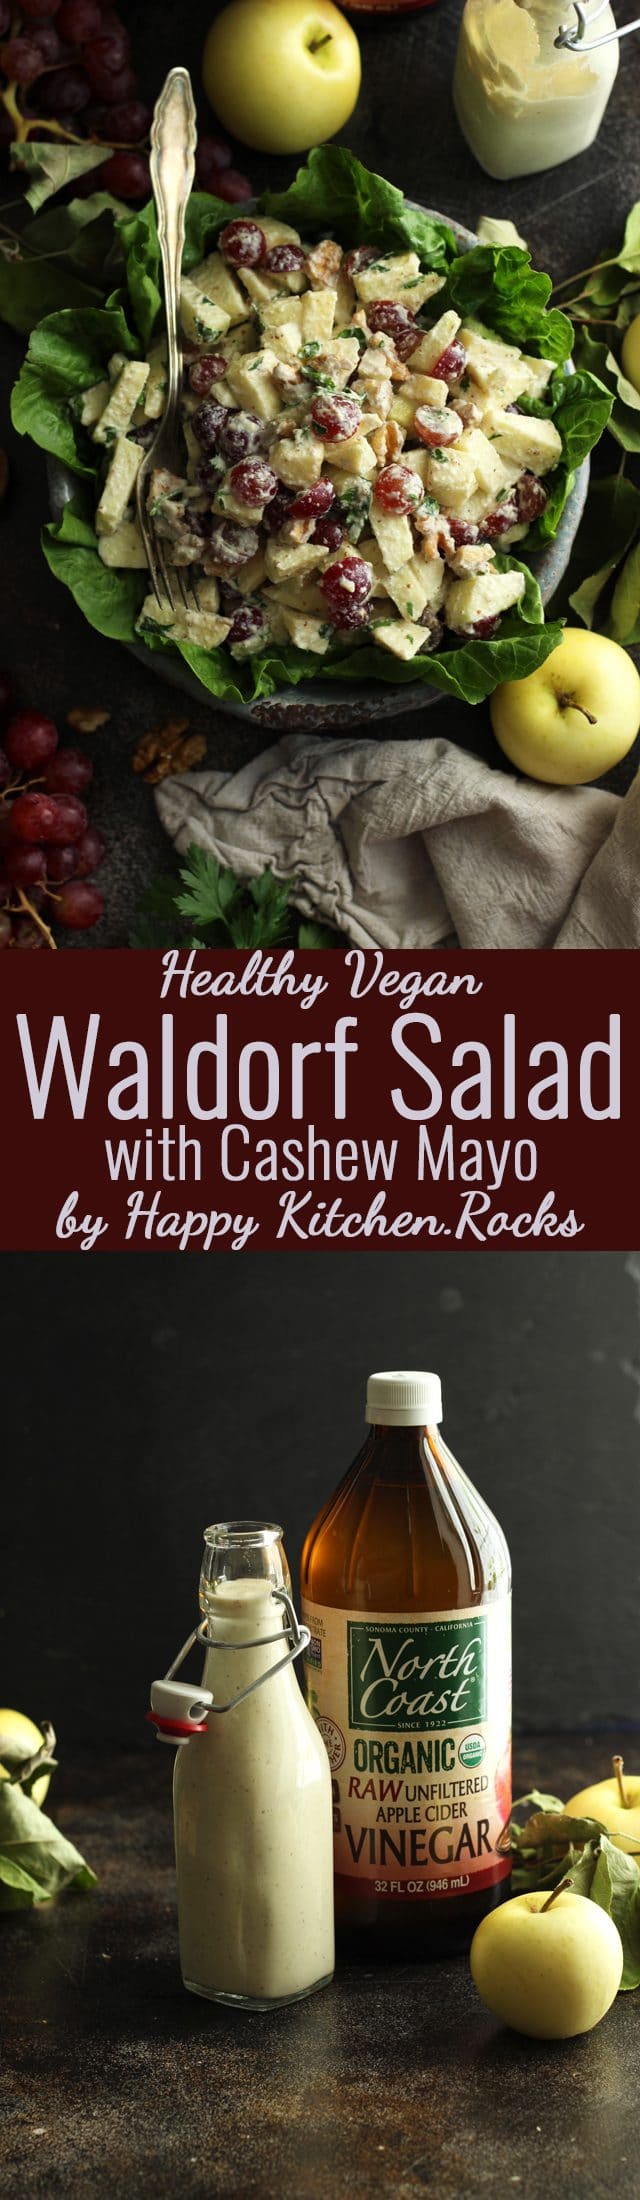 This healthy Waldorf salad is a vegan take on the classic Waldorf salad. Deliciously creamy apple cider vinegar dressing is used instead of mayonnaise for a lighter and fresher version. Perfect for your Labor Day vegan menu! @nthcoastorganic #ad #nodairy #salad #waldorfsalad #apples #walnuts #grapes #veganreceipe #easyrecipe #paleo #labordayrecipes #healthyrecipes #saladrecipes #recipe #recipes #sidedish #summersidedish #lunch #summersalads #picnicrecipe #fallrecipe